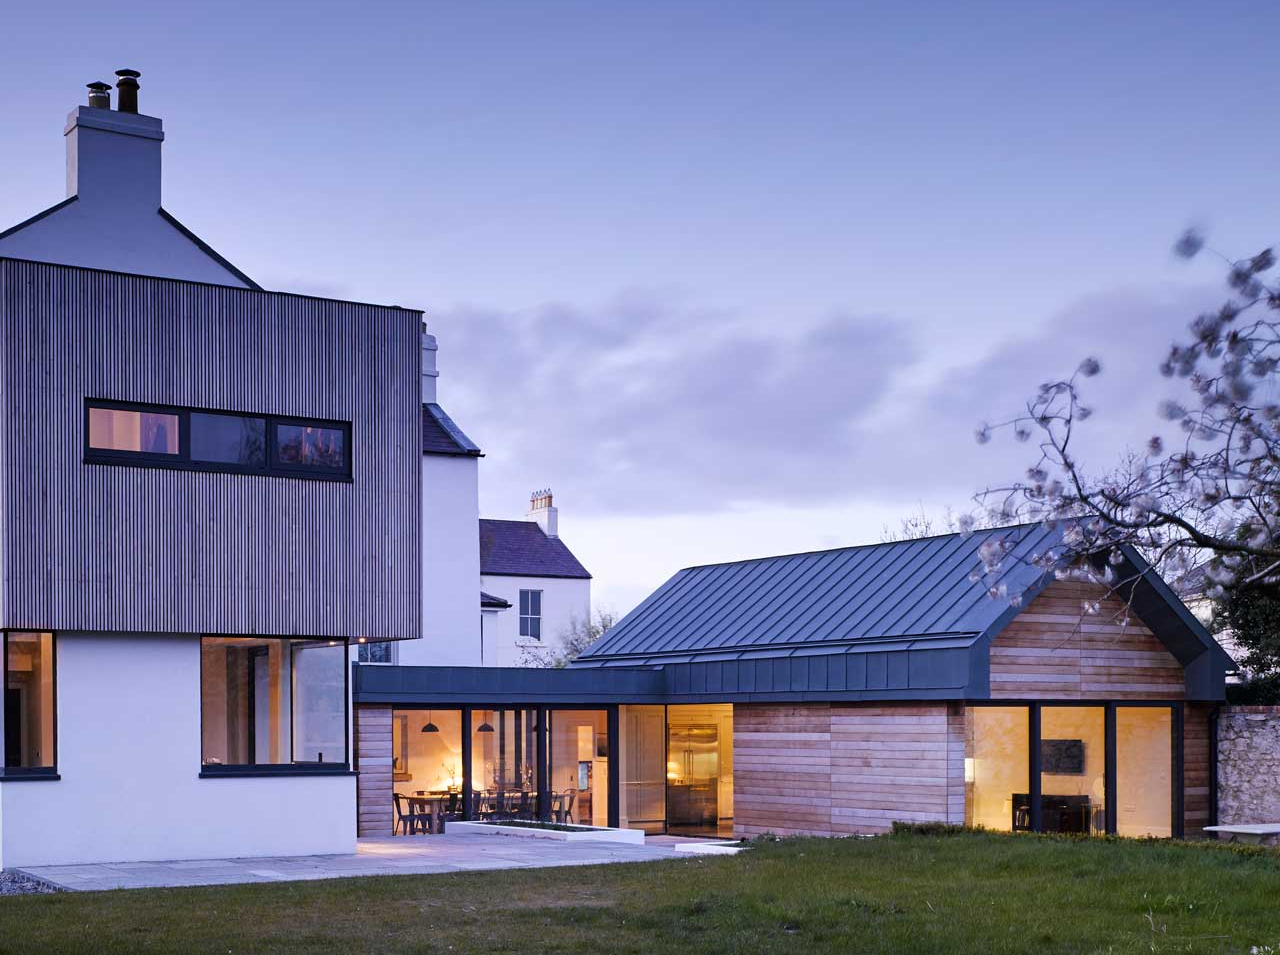 Exterior view from the backyard of the 'Hazel Lane' project designed by 'Dublin Design Studio'